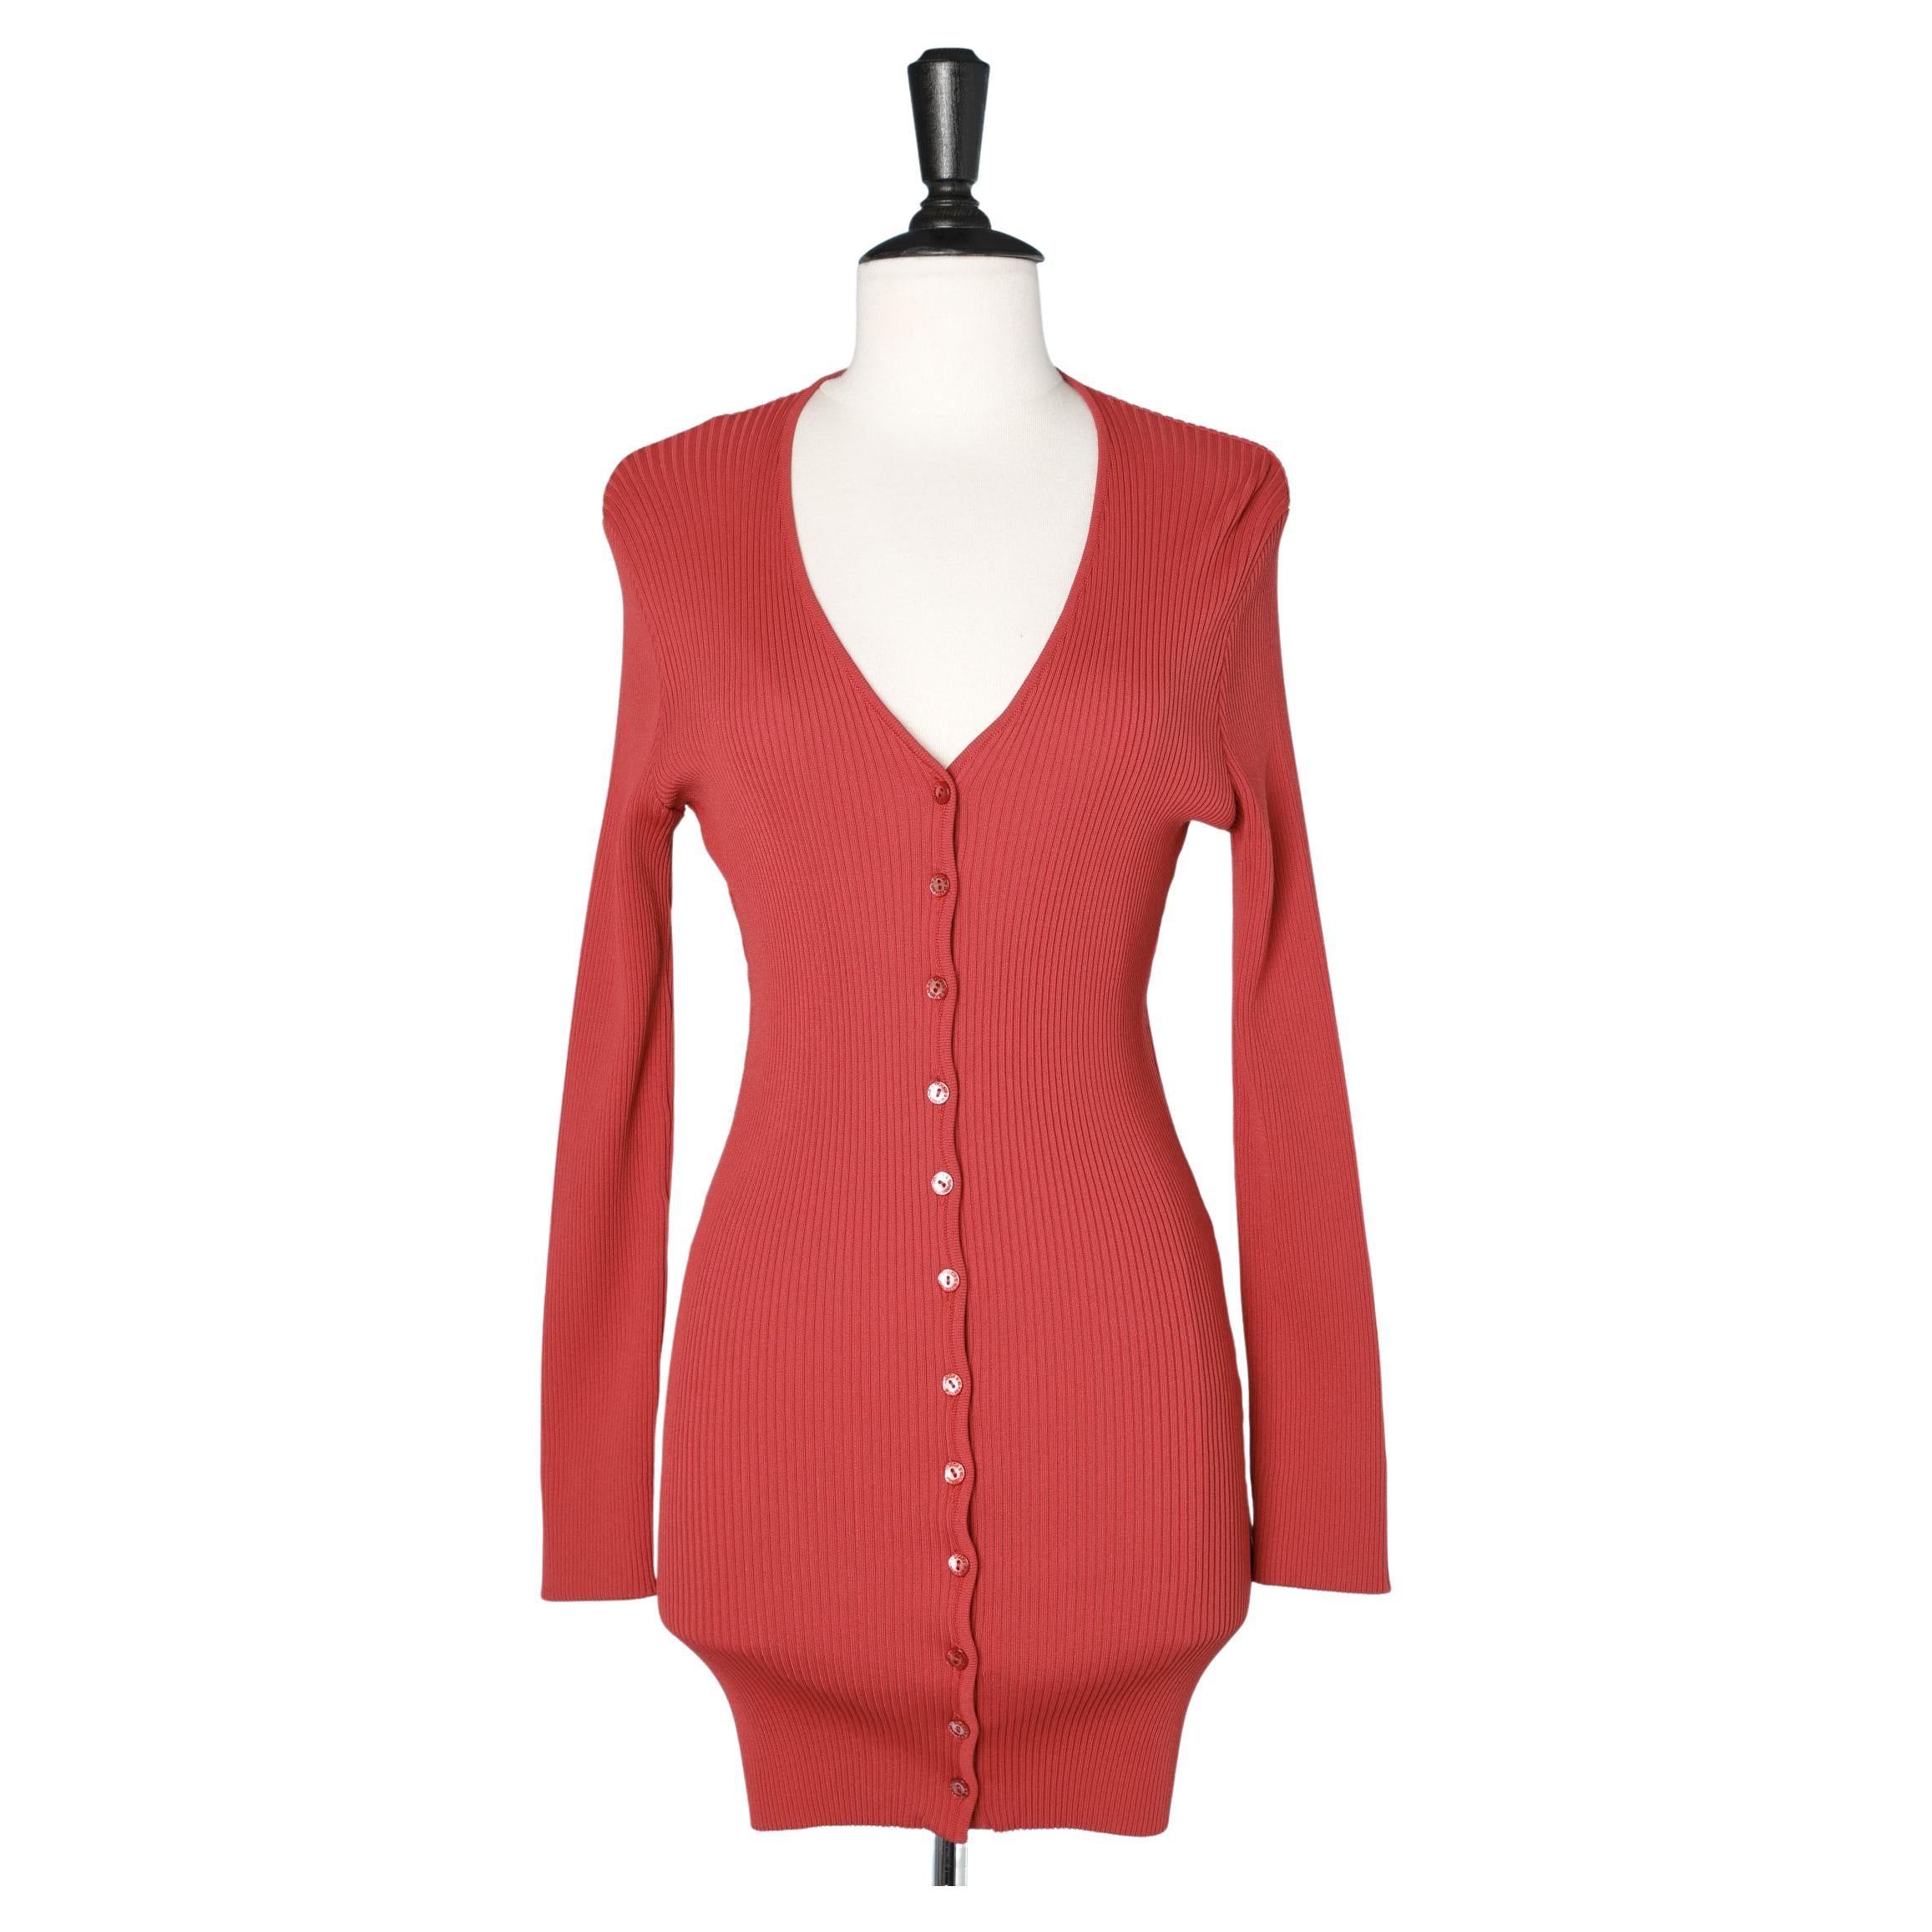 Red knit cardigan with branded buttons Dolce & Gabbana 